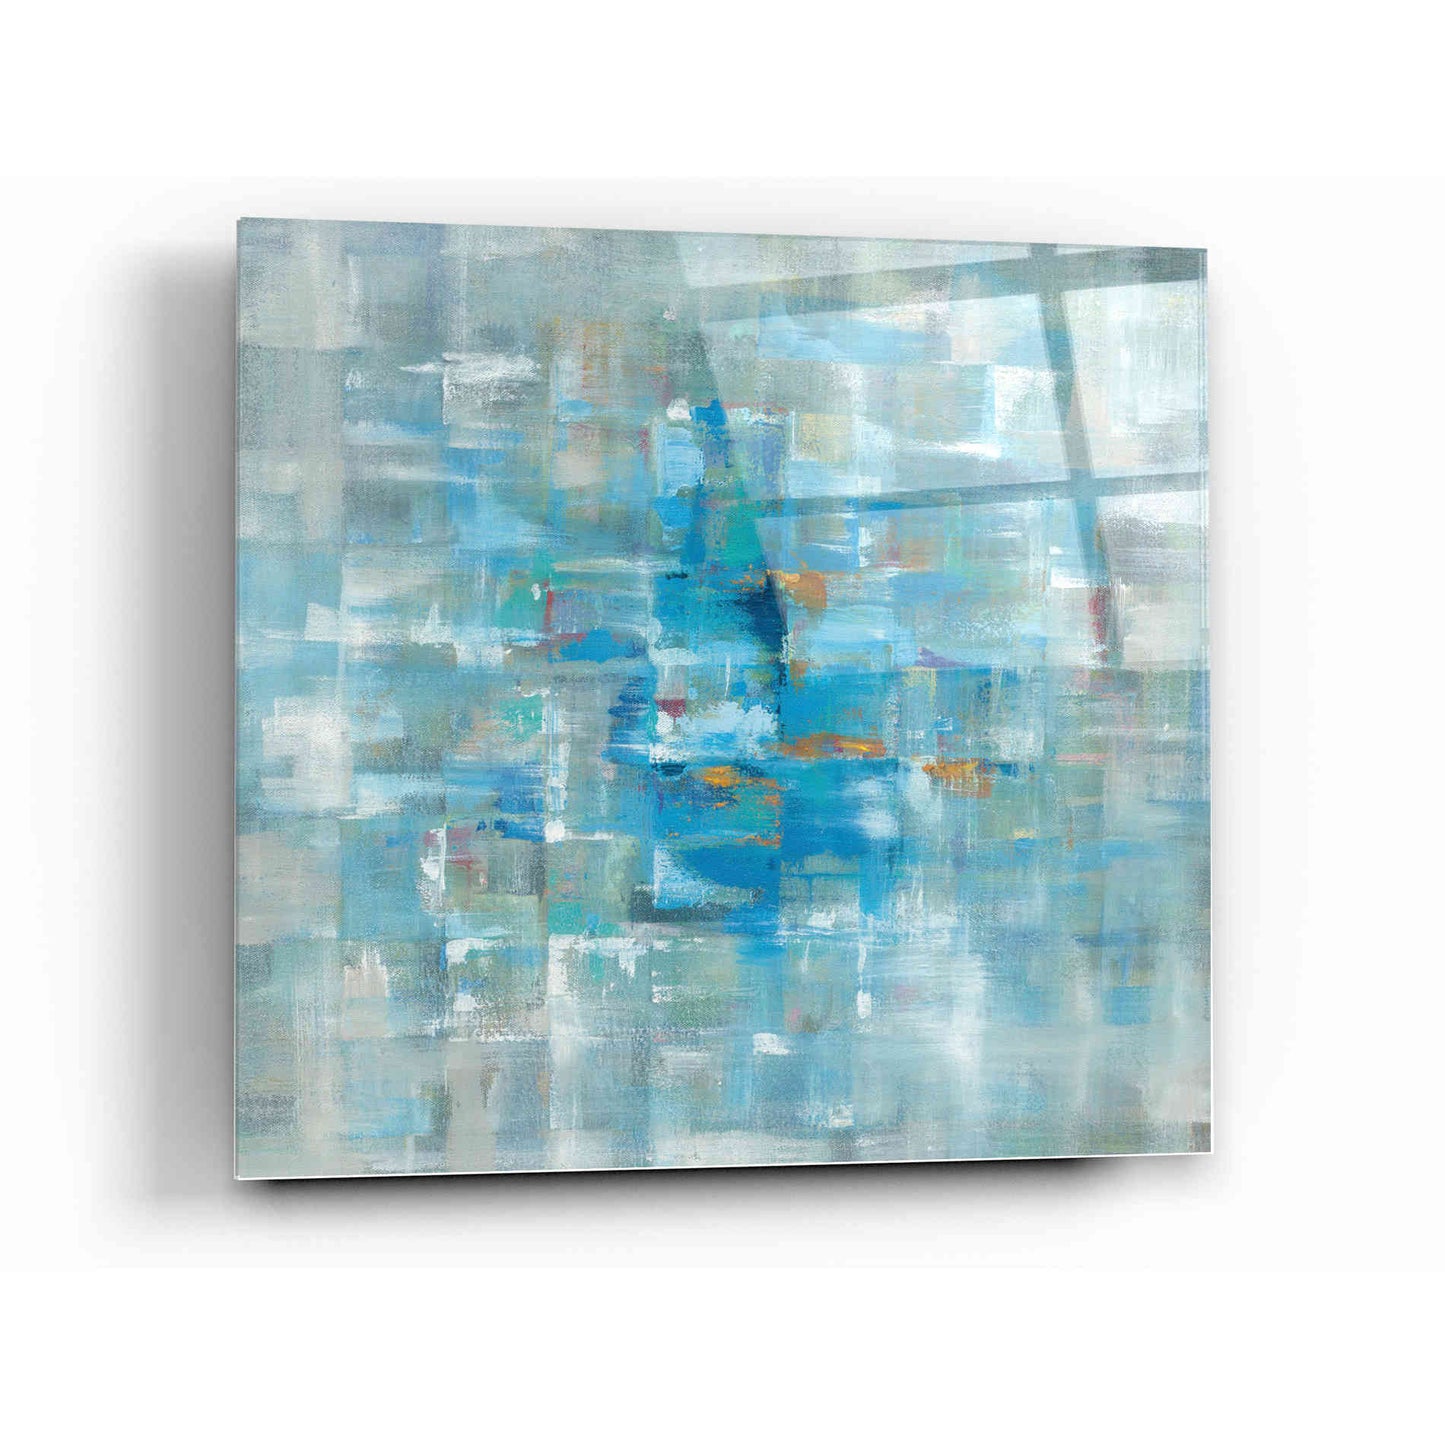 Epic Art 'Abstract Squares' by Danhui Nai, Acrylic Glass Wall Art,12x12